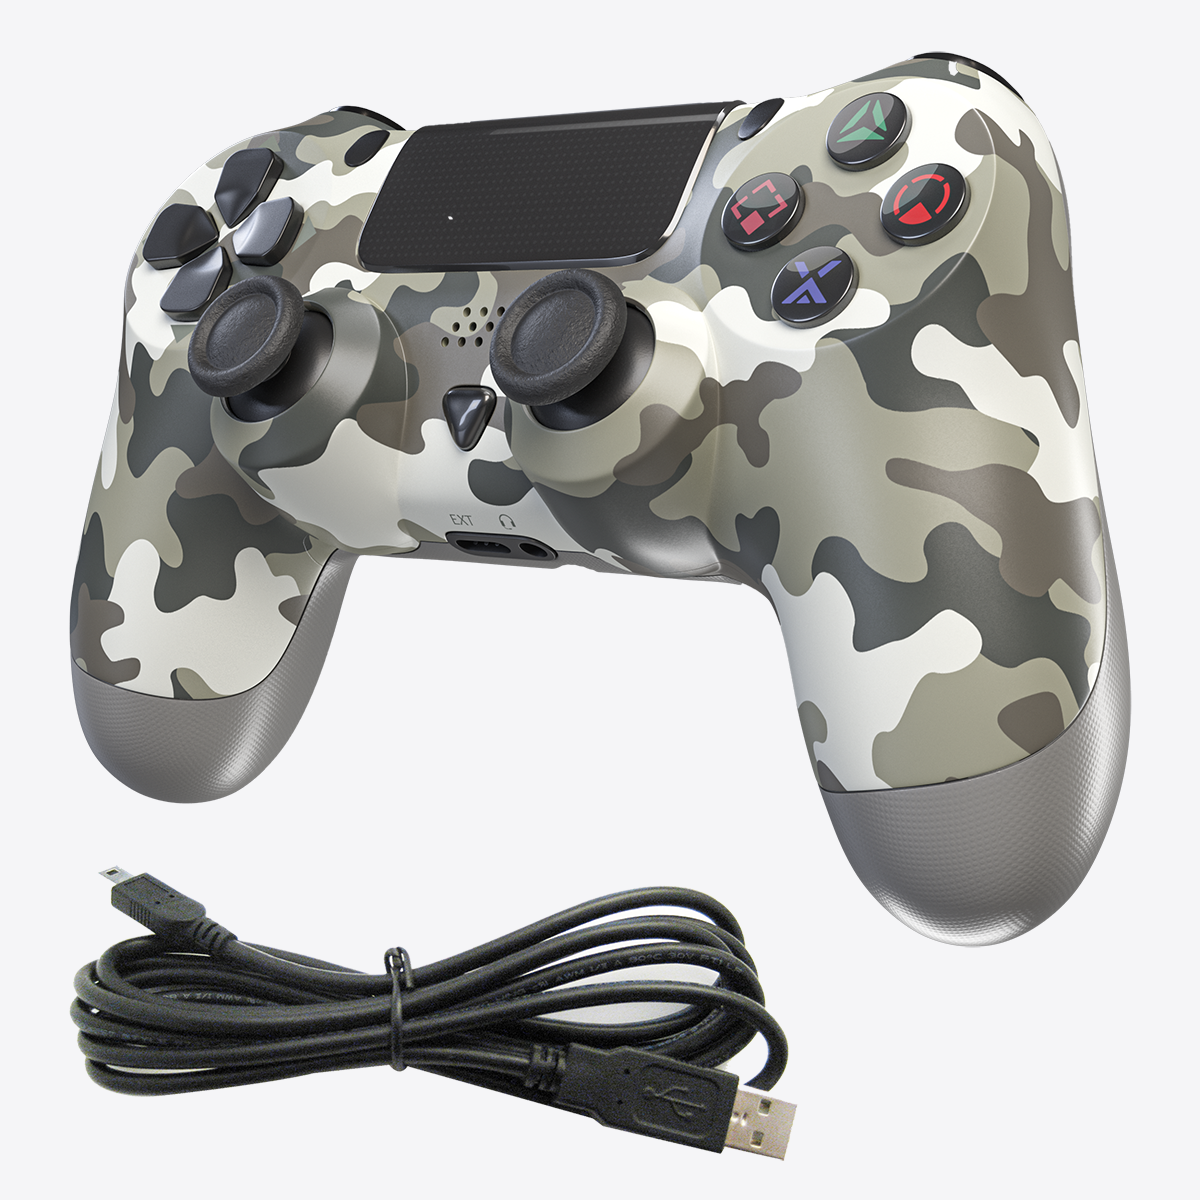 Wireless Bluetooth Controller for Sony PS4® - Camo - XYAB